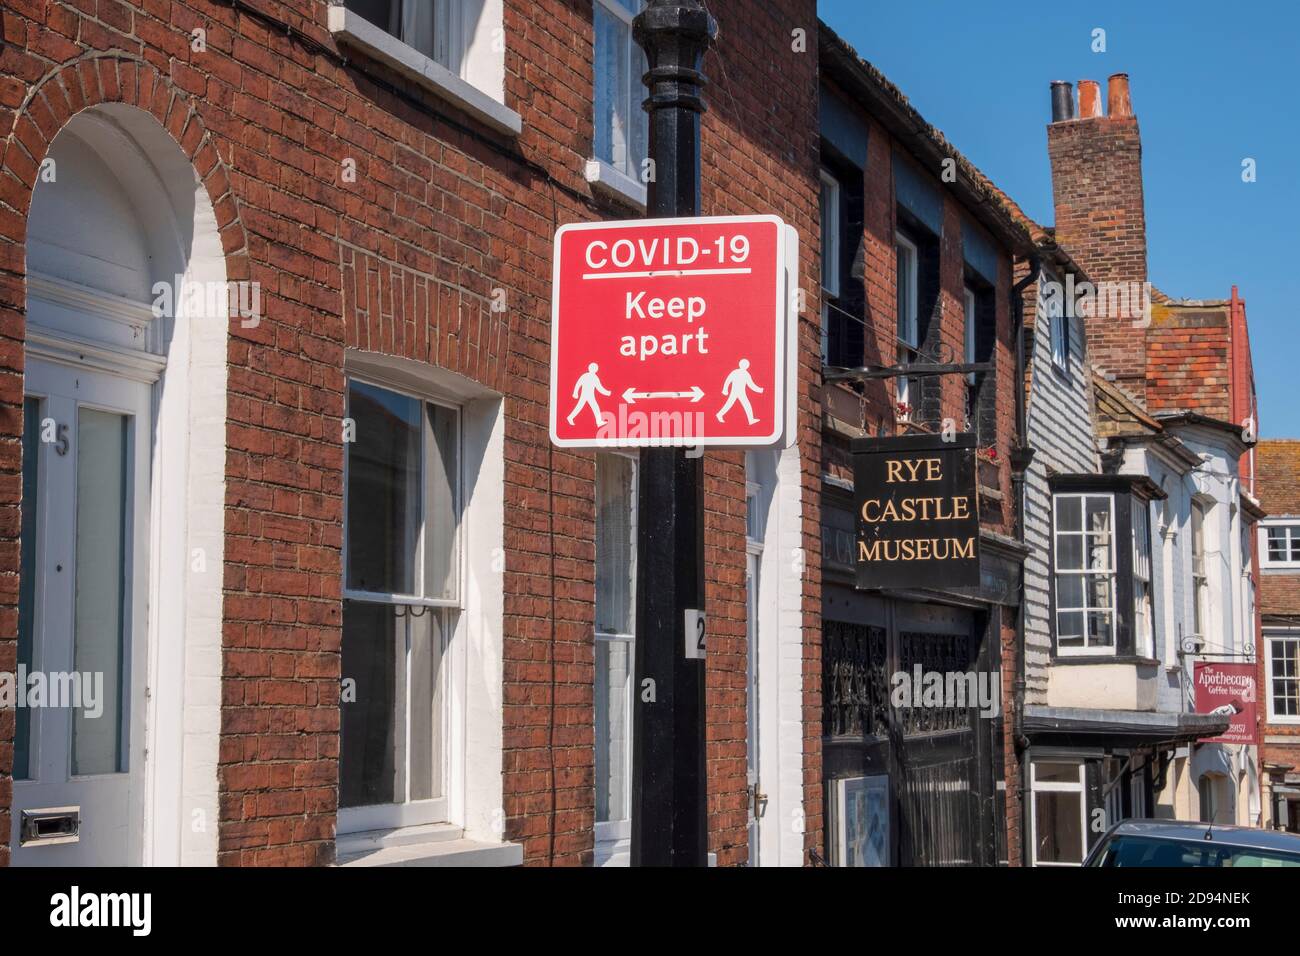 Covid 19, Keep Apart, Social Distancing Street sign in Rye, East Sussex, UK Stockfoto